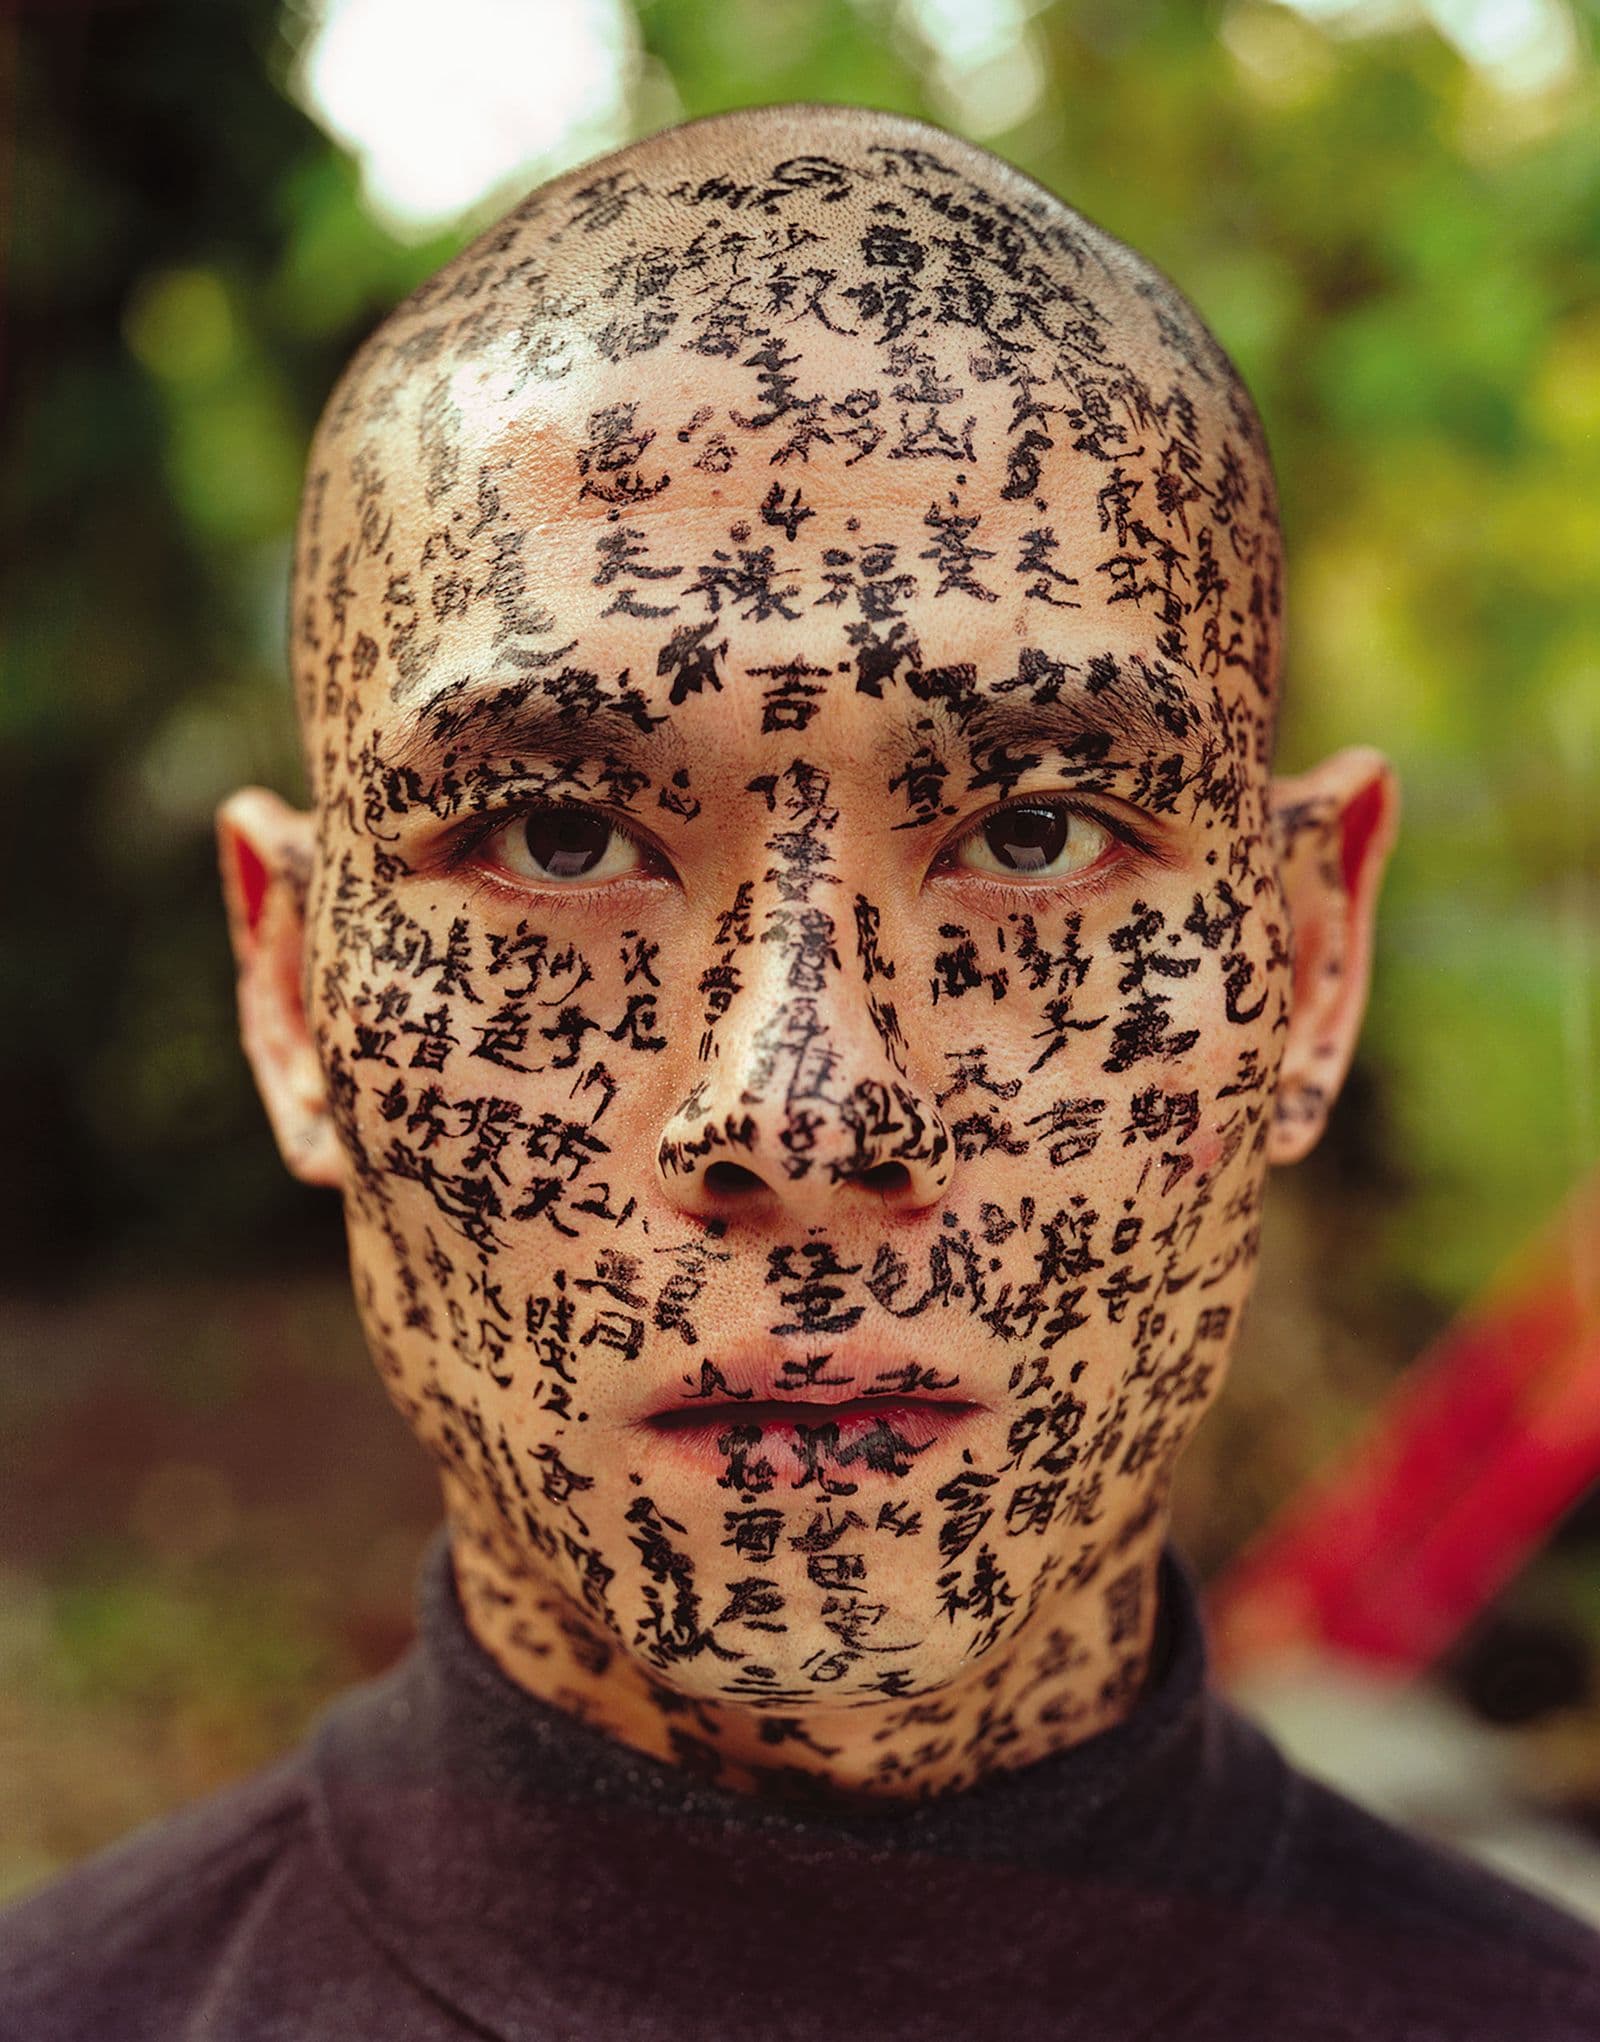 Close-up photograph of a man with his face, neck, ears and scalp covered in Asian characters in black ink